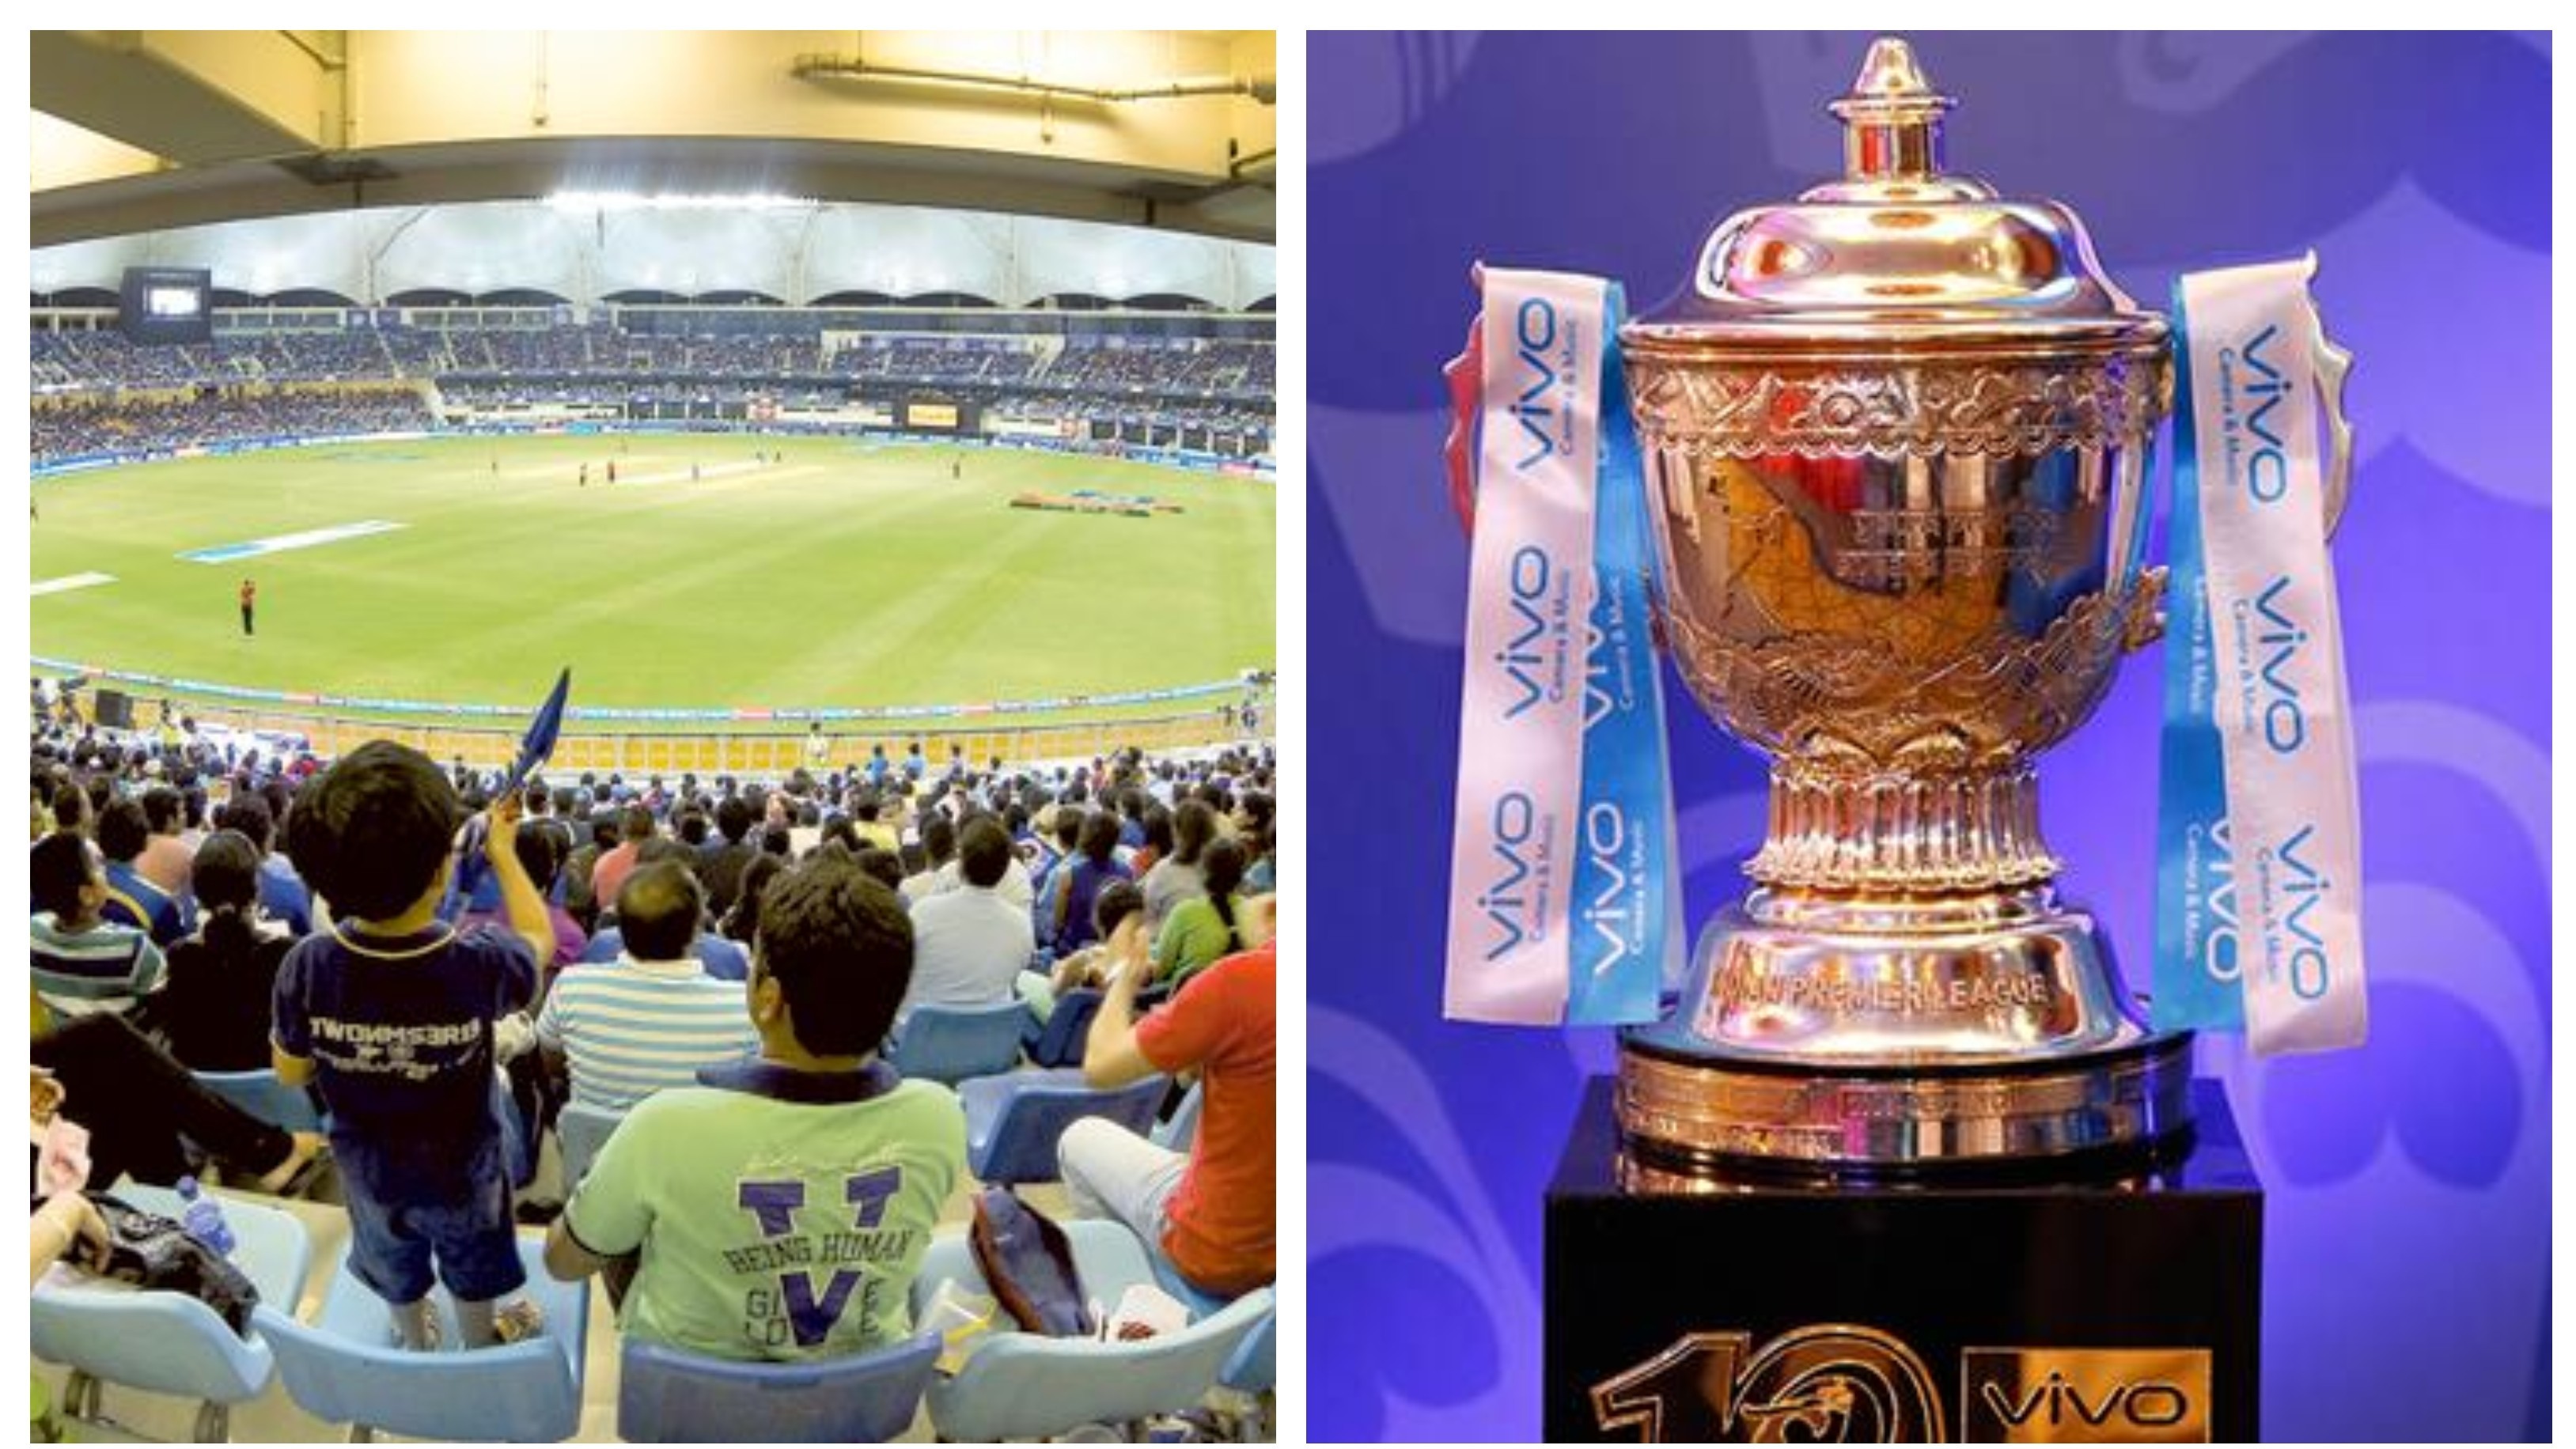 IPL 2020 likely to be held in UAE; Dubai among top contenders to host India's training camp